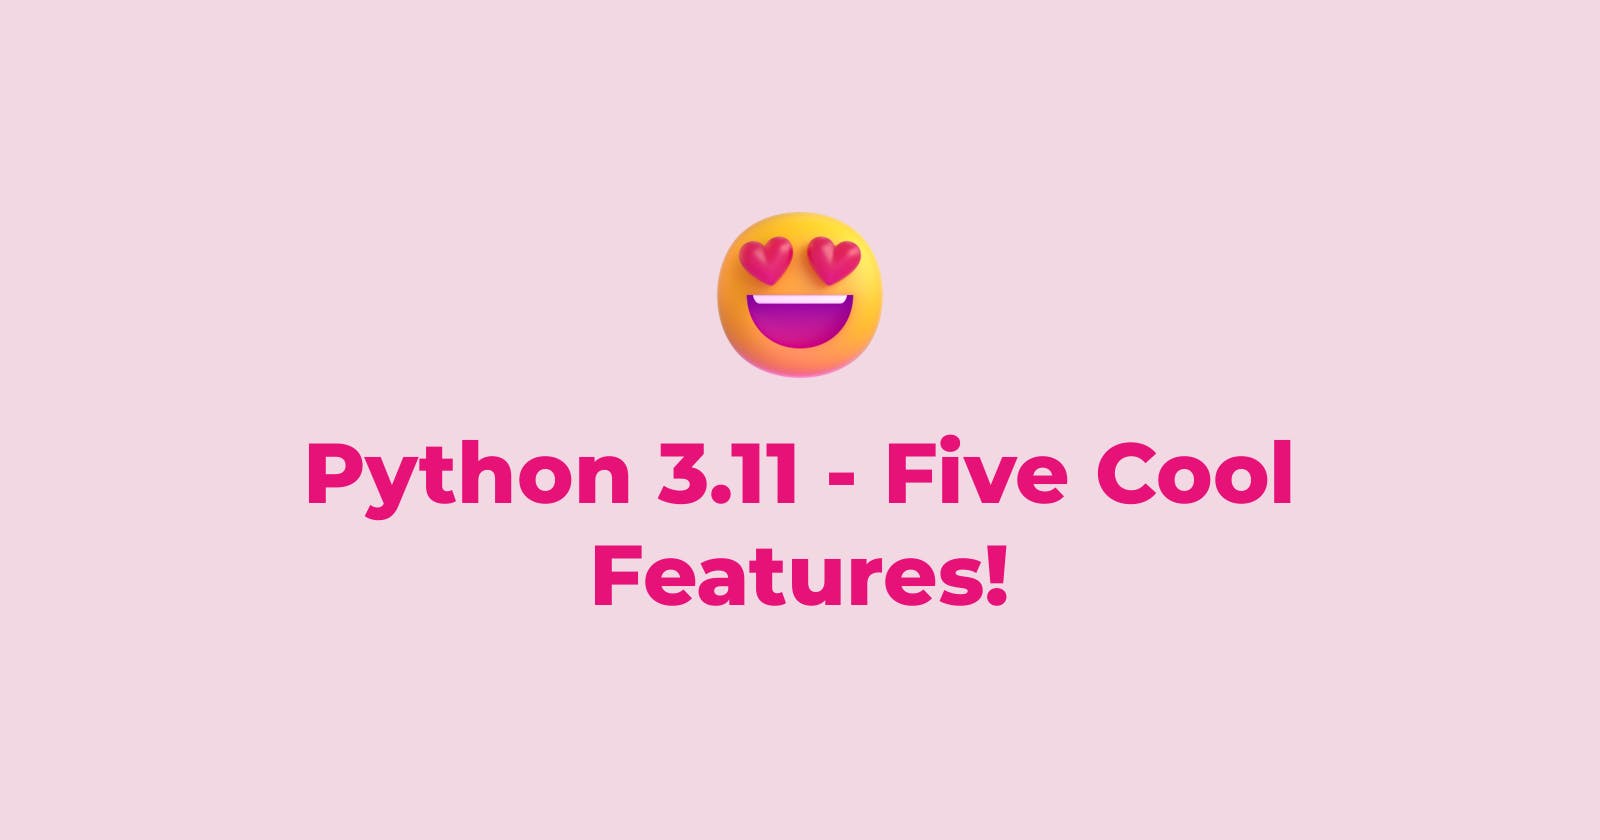 Python 3.11 - Five Cool Features!